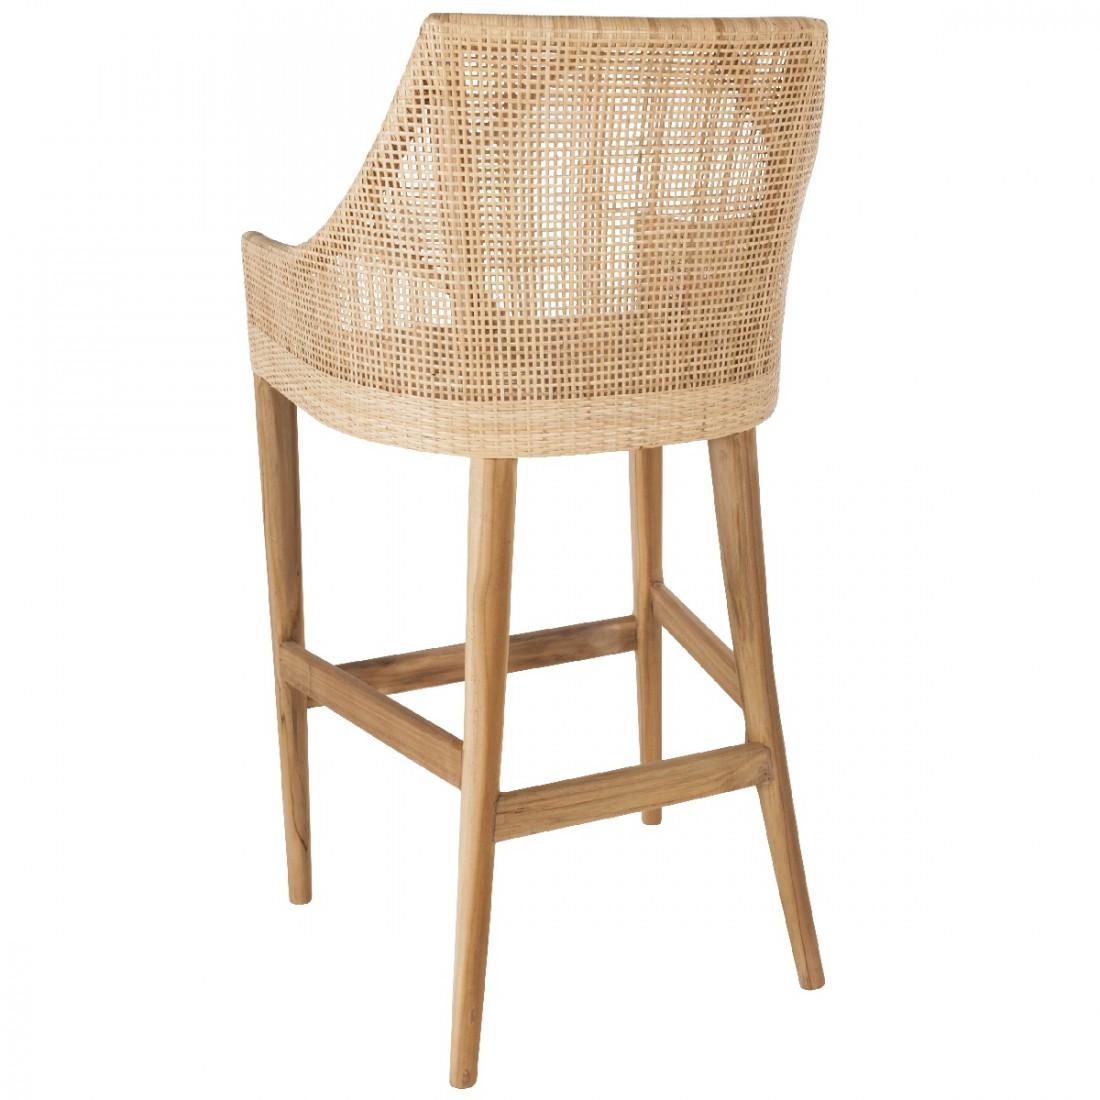 Elegant French design bar stools with a teak wooden structure and a braided rattan seating shell combining quality, robustness and class. Comfortable and ergonomic, aerial and poetic. The armrests height is 62cm and the seat height is 71cm. In